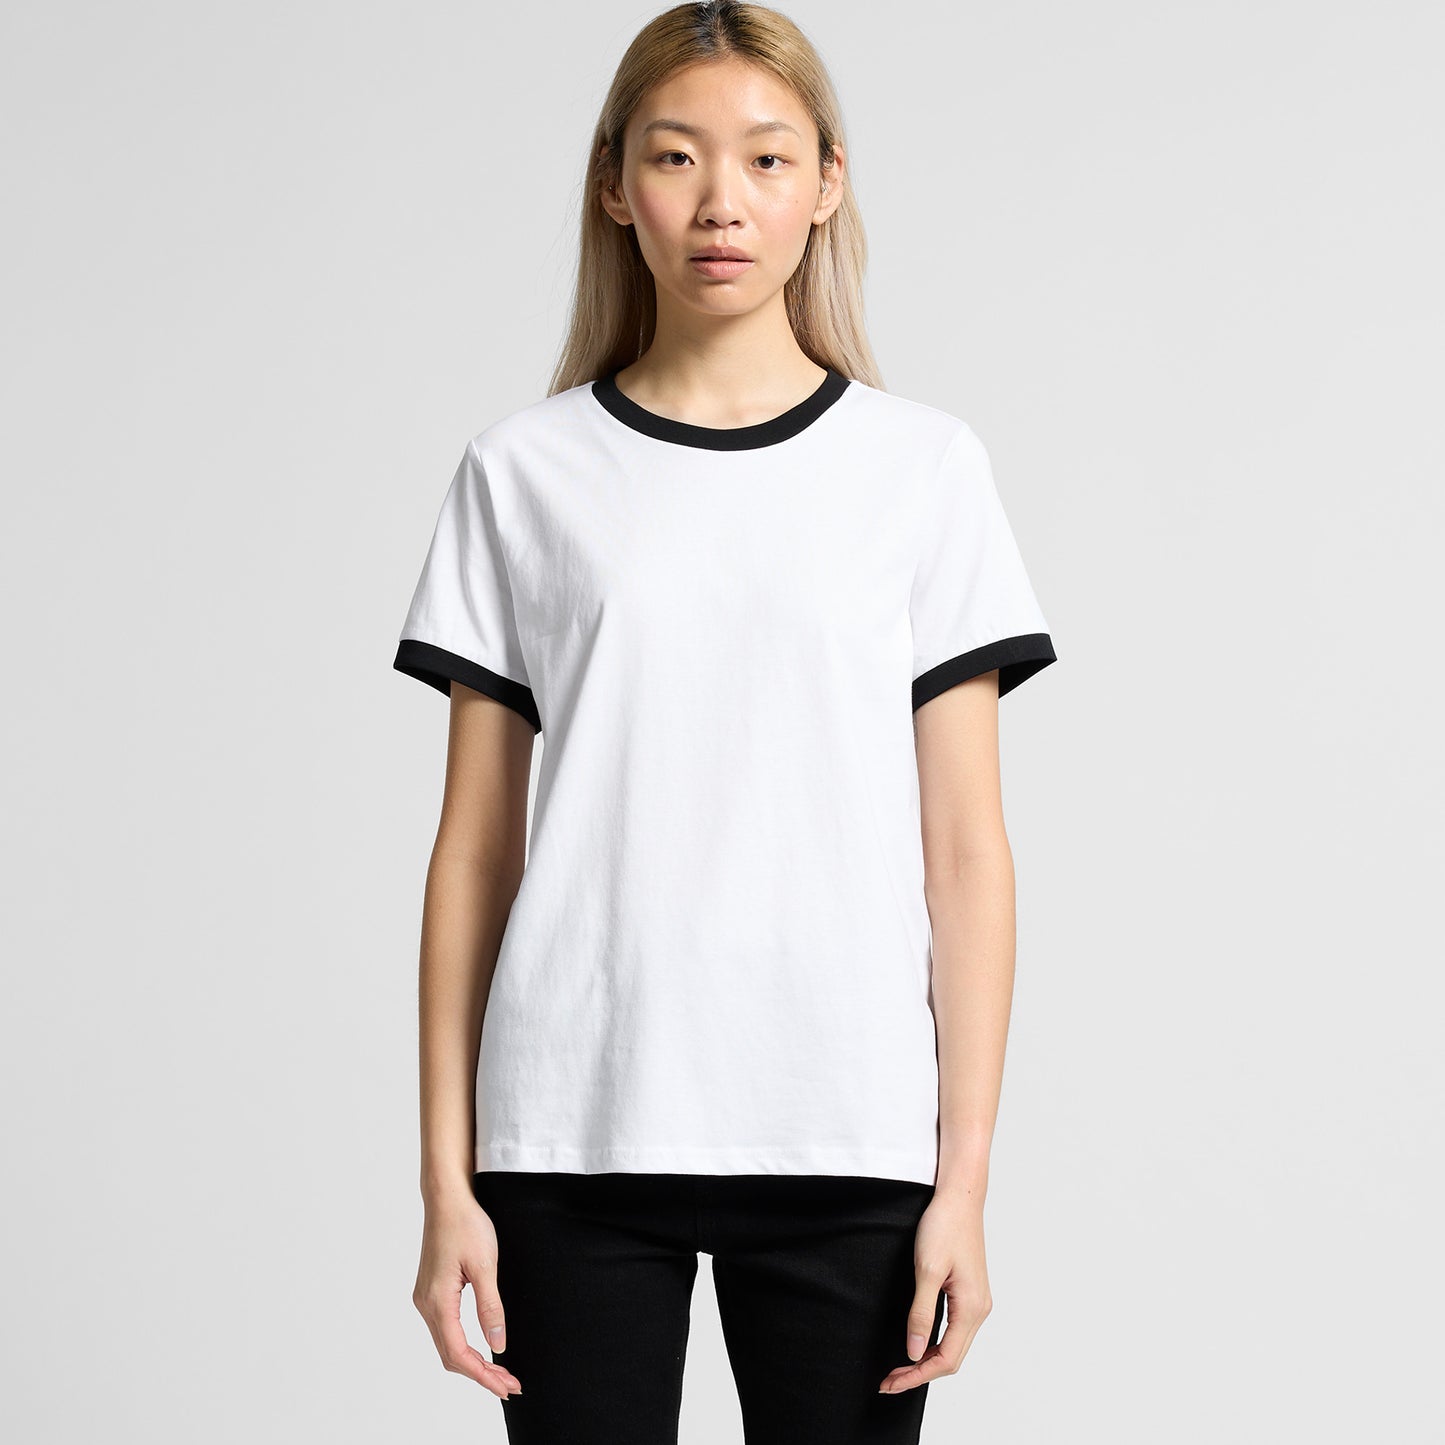 AS Colour Wo's Ringer Tee - 4053